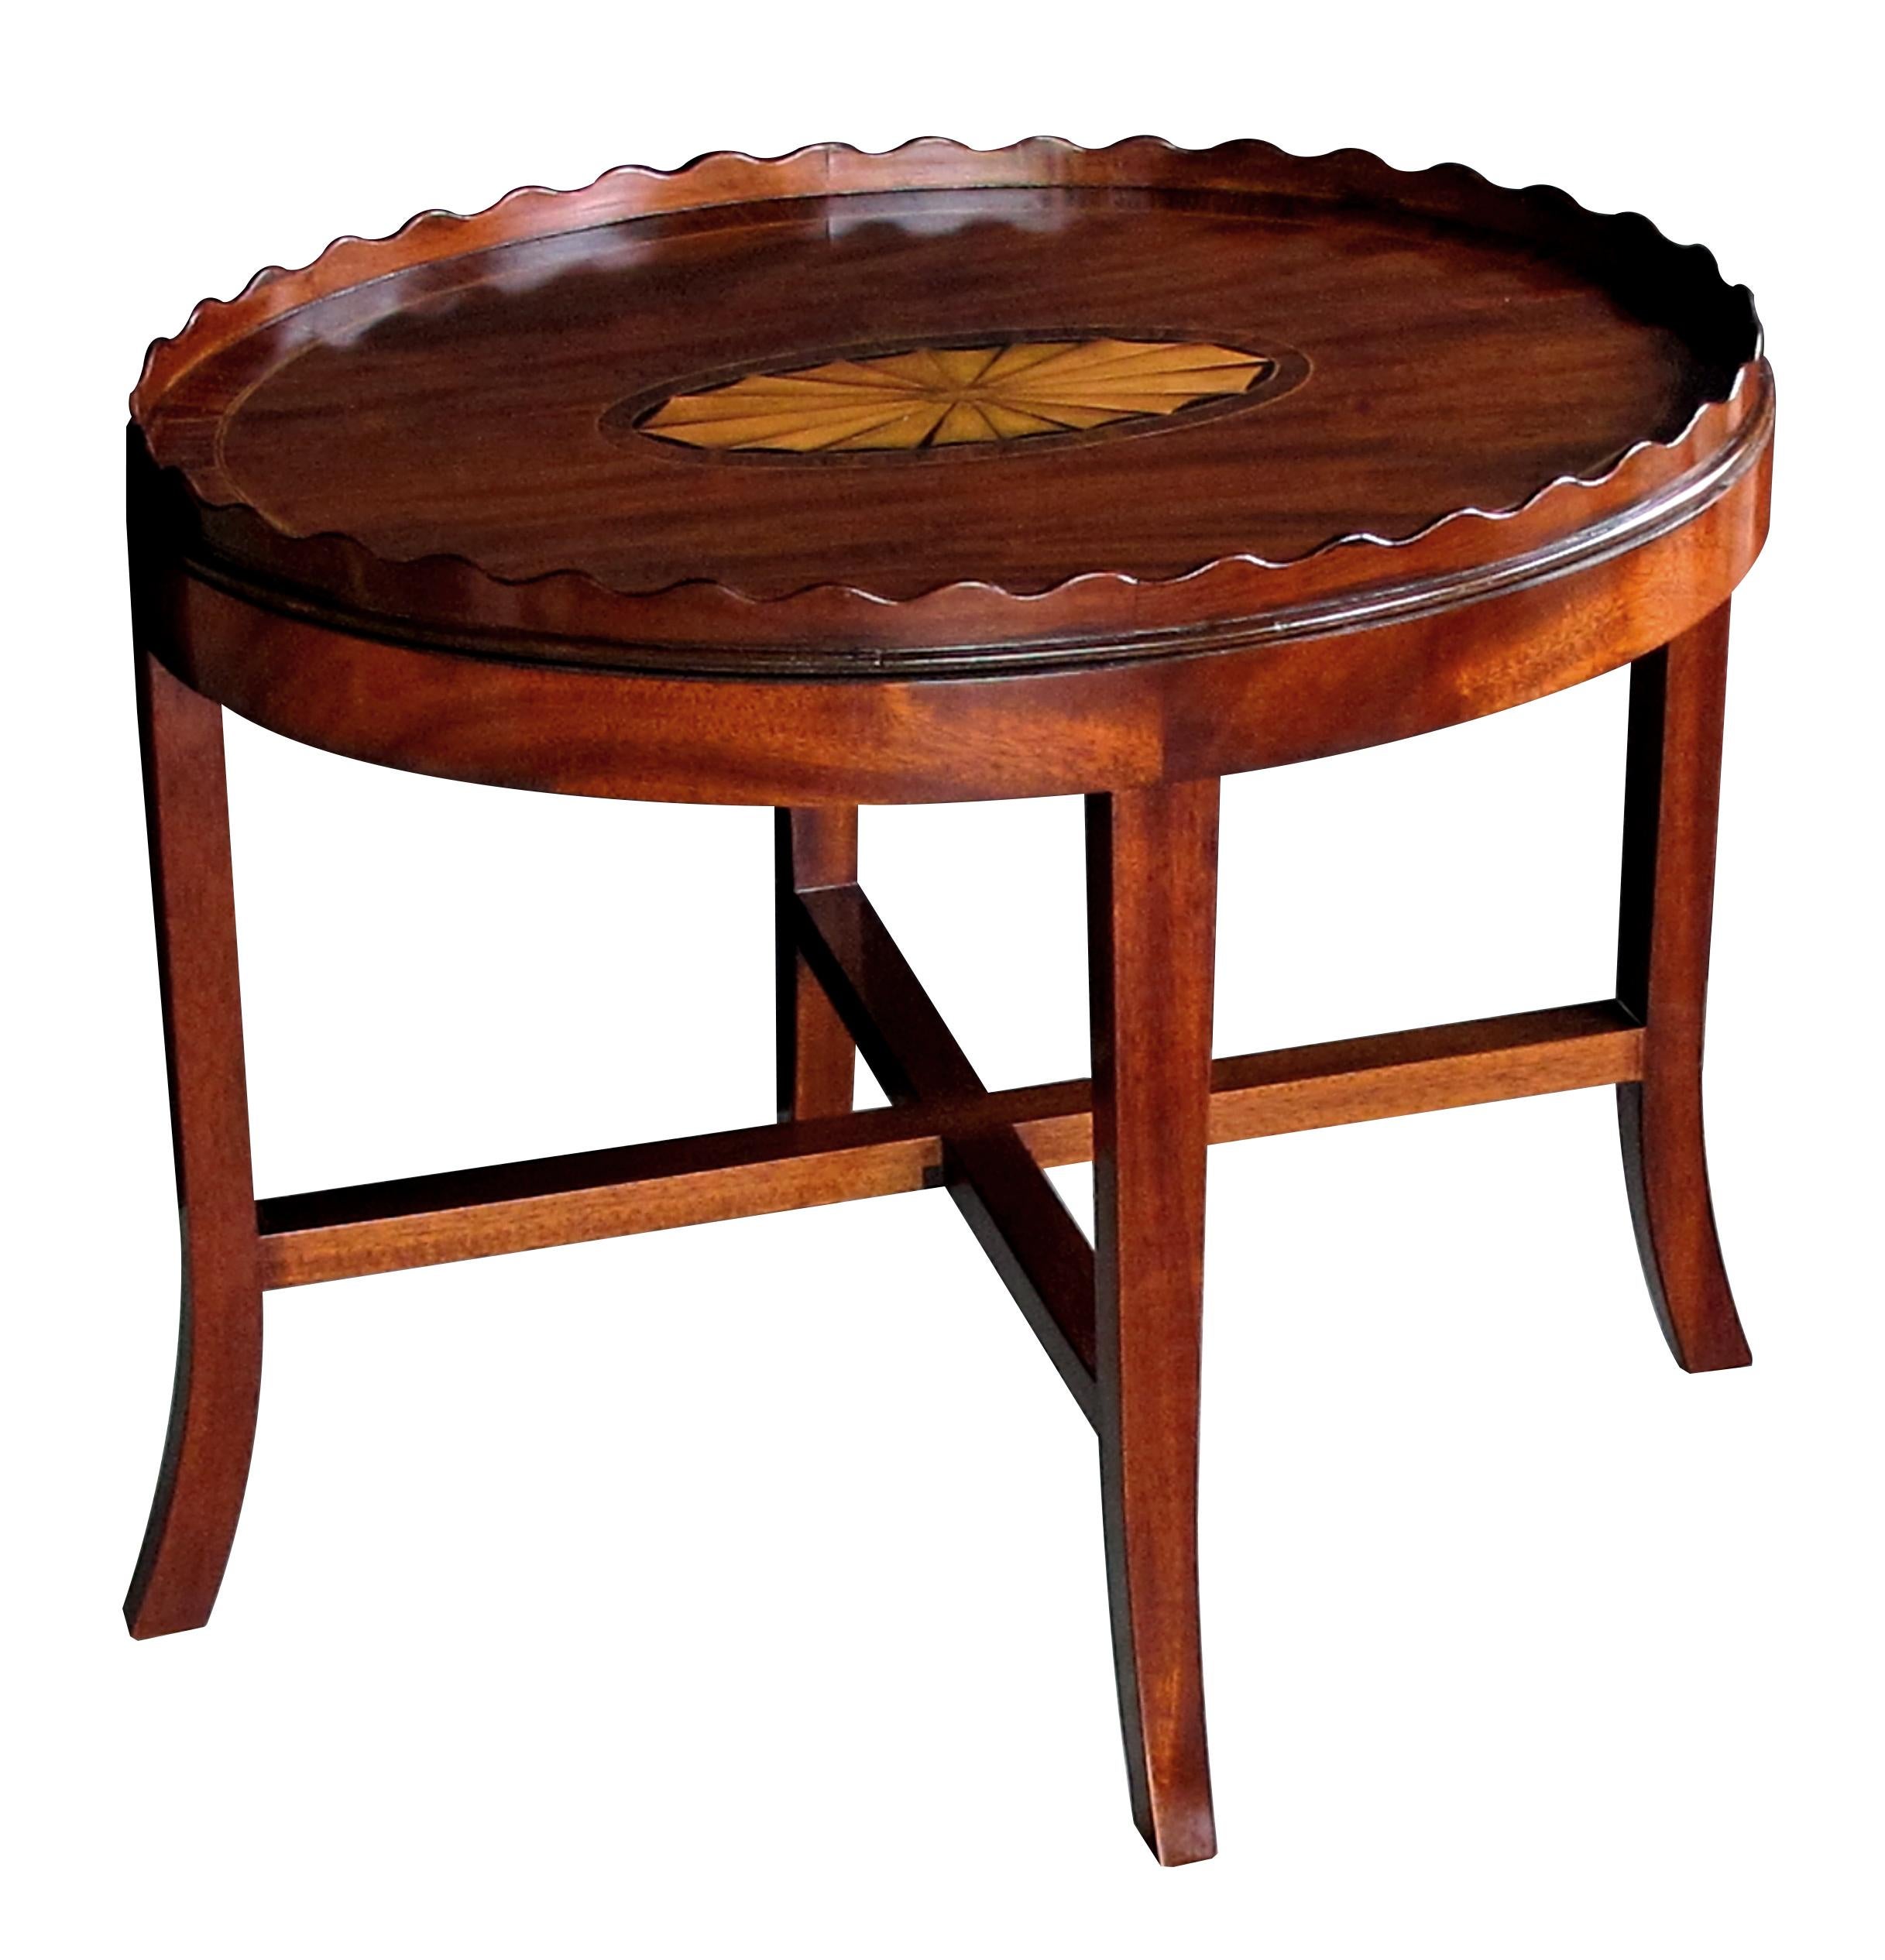 The large mahogany oval tray centering an impressive satinwood shell motif surrounded by rosewood banding; raised on a later stand. (the tray itself measures 24.5